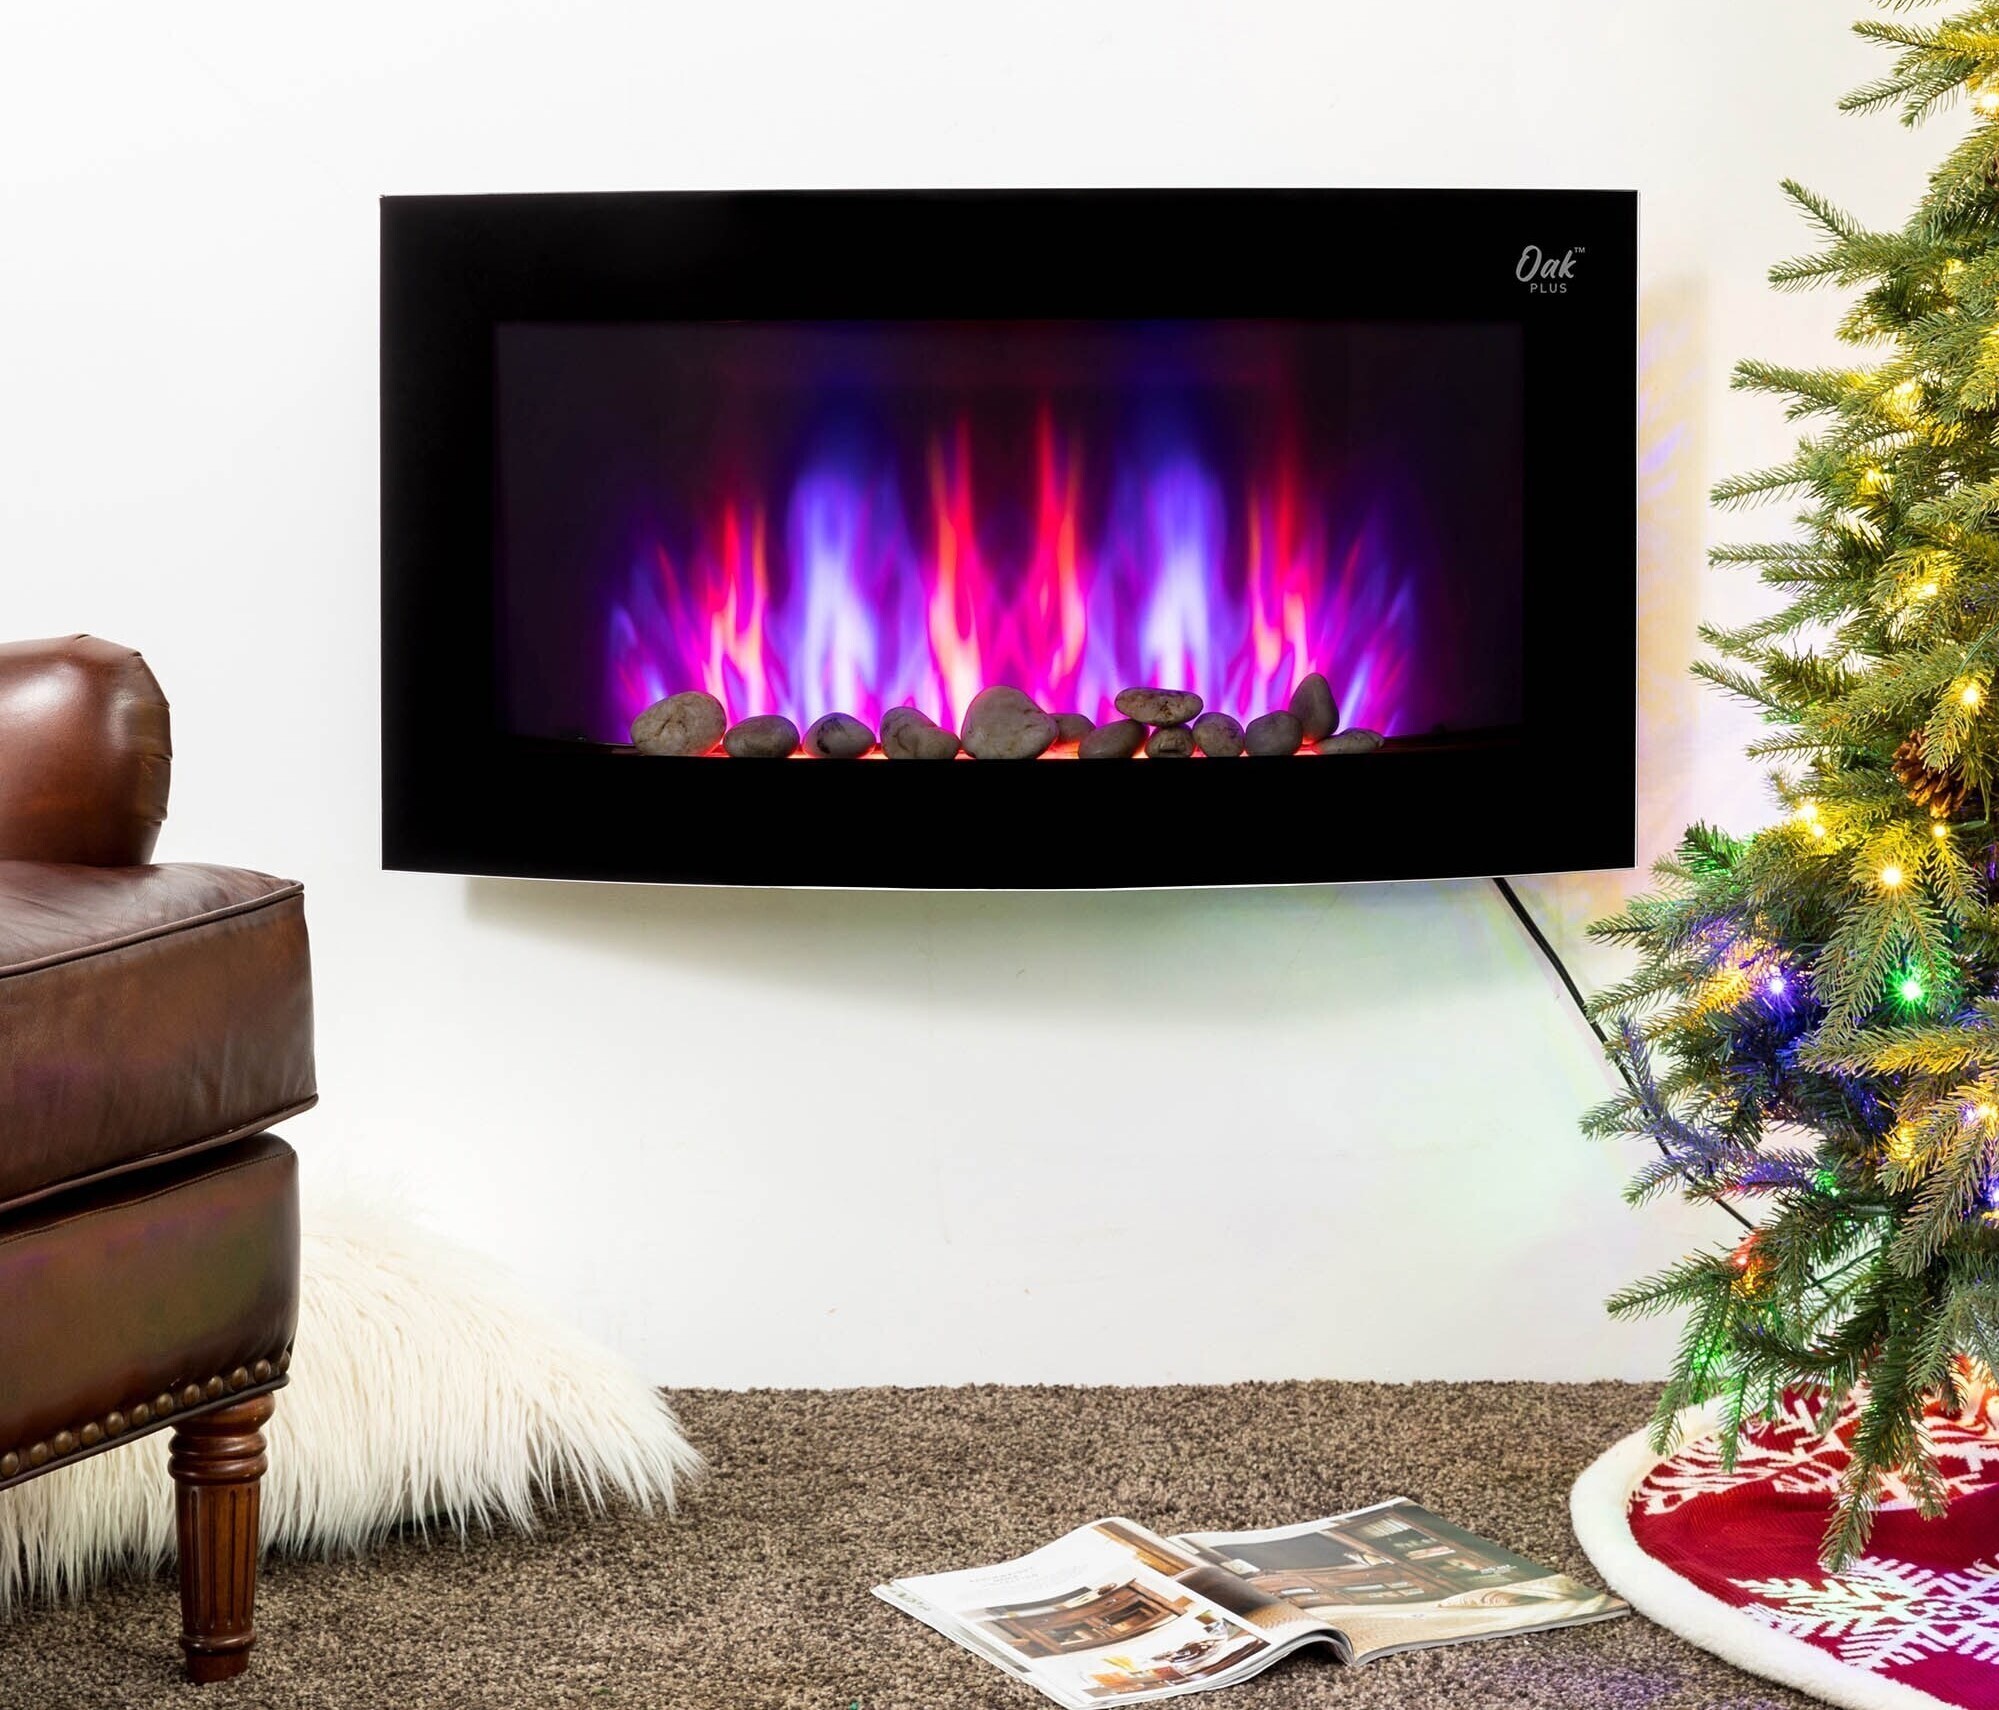 Small Wall Mount Fireplace With Colored Flames